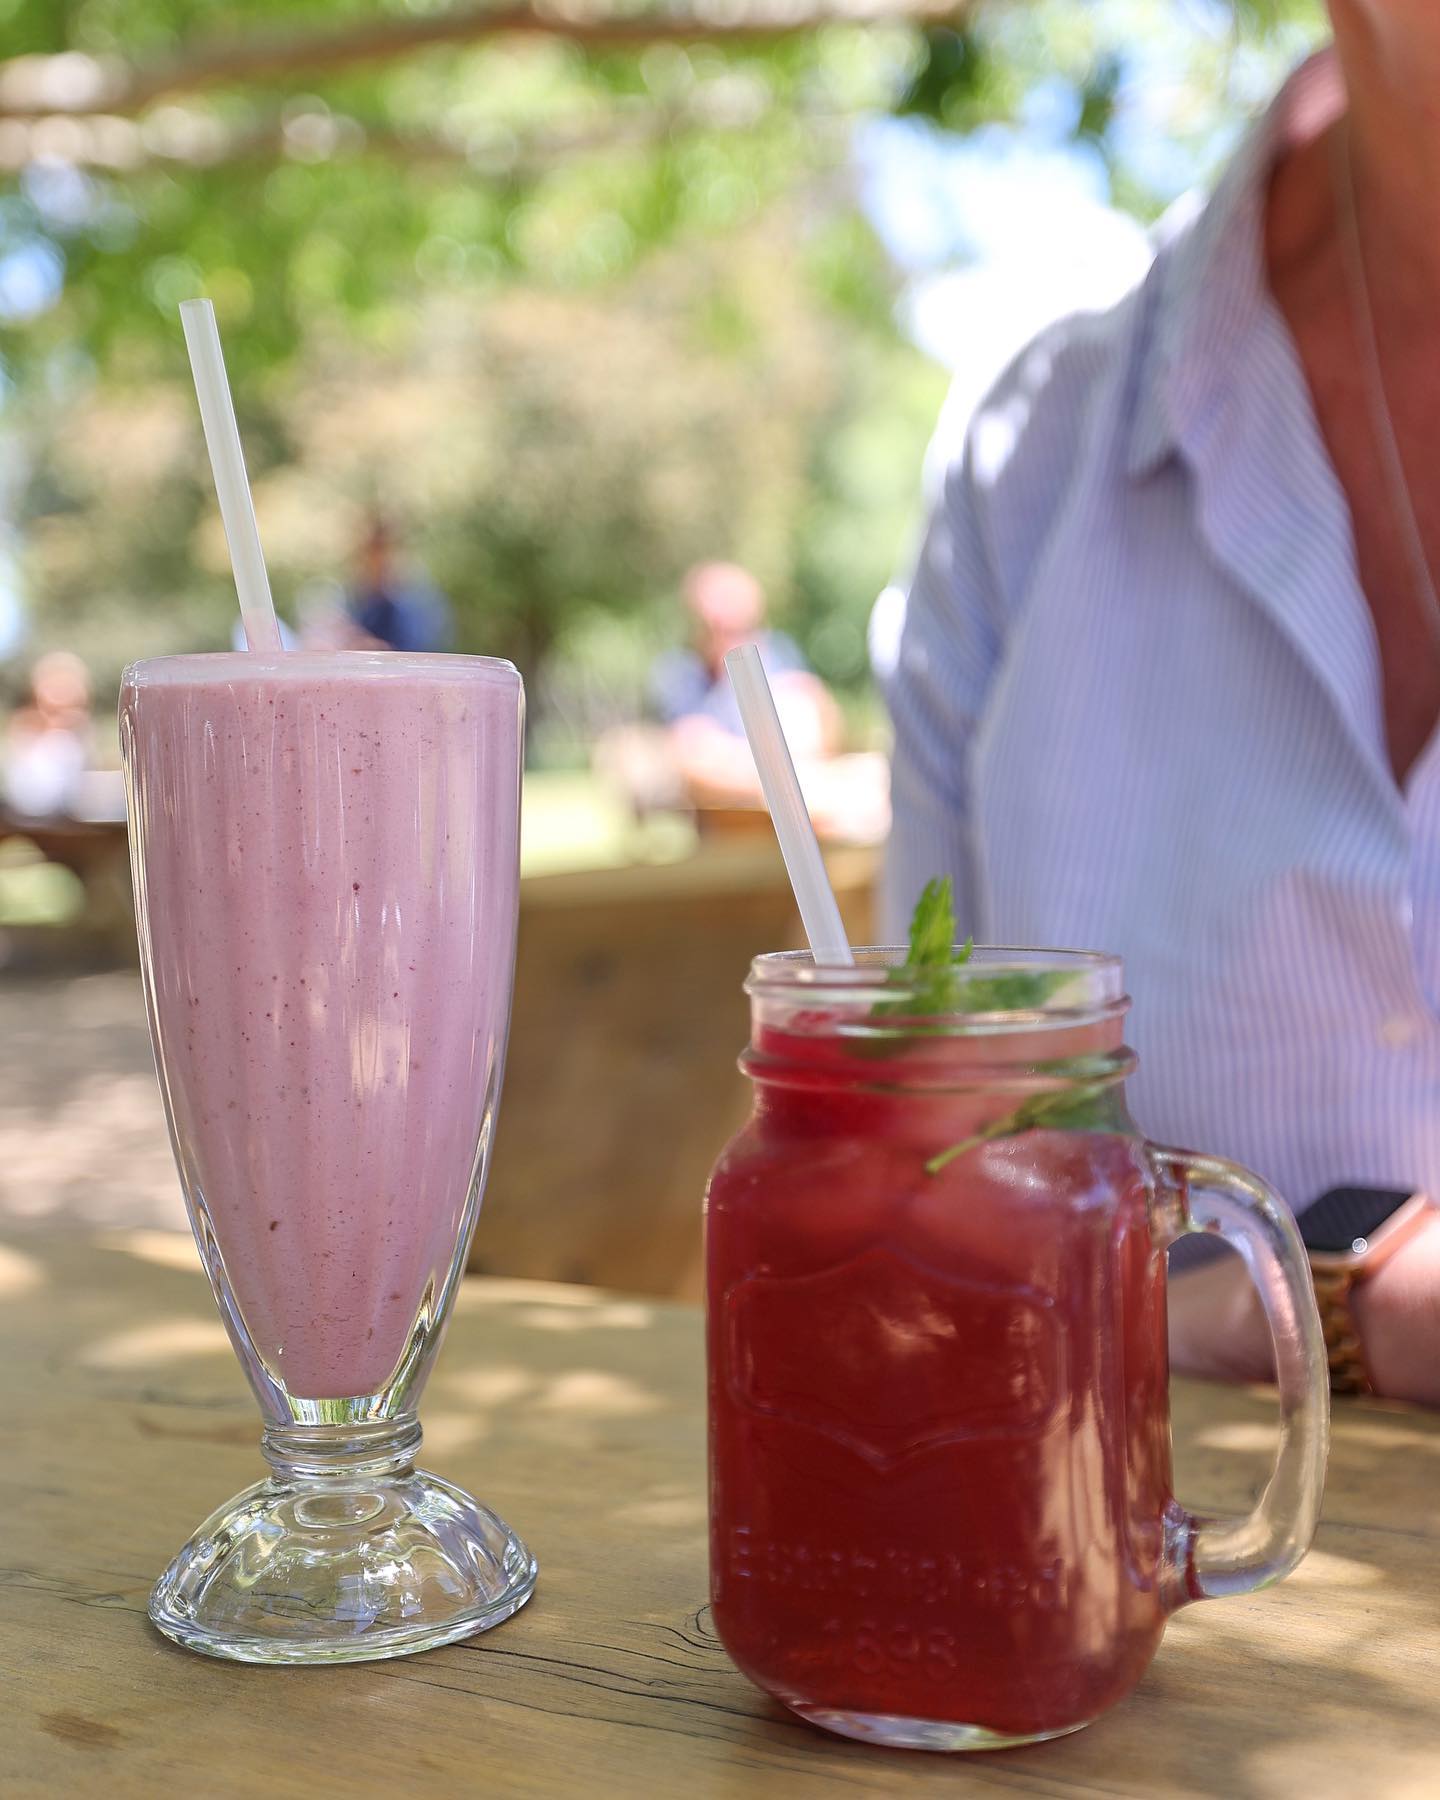 Sunshine and smoothies, name a better duo ☀️🍓

Treat yourself to a spring smoothie outside on our deck or lawn whilst the sun is shining! See you soon 😋